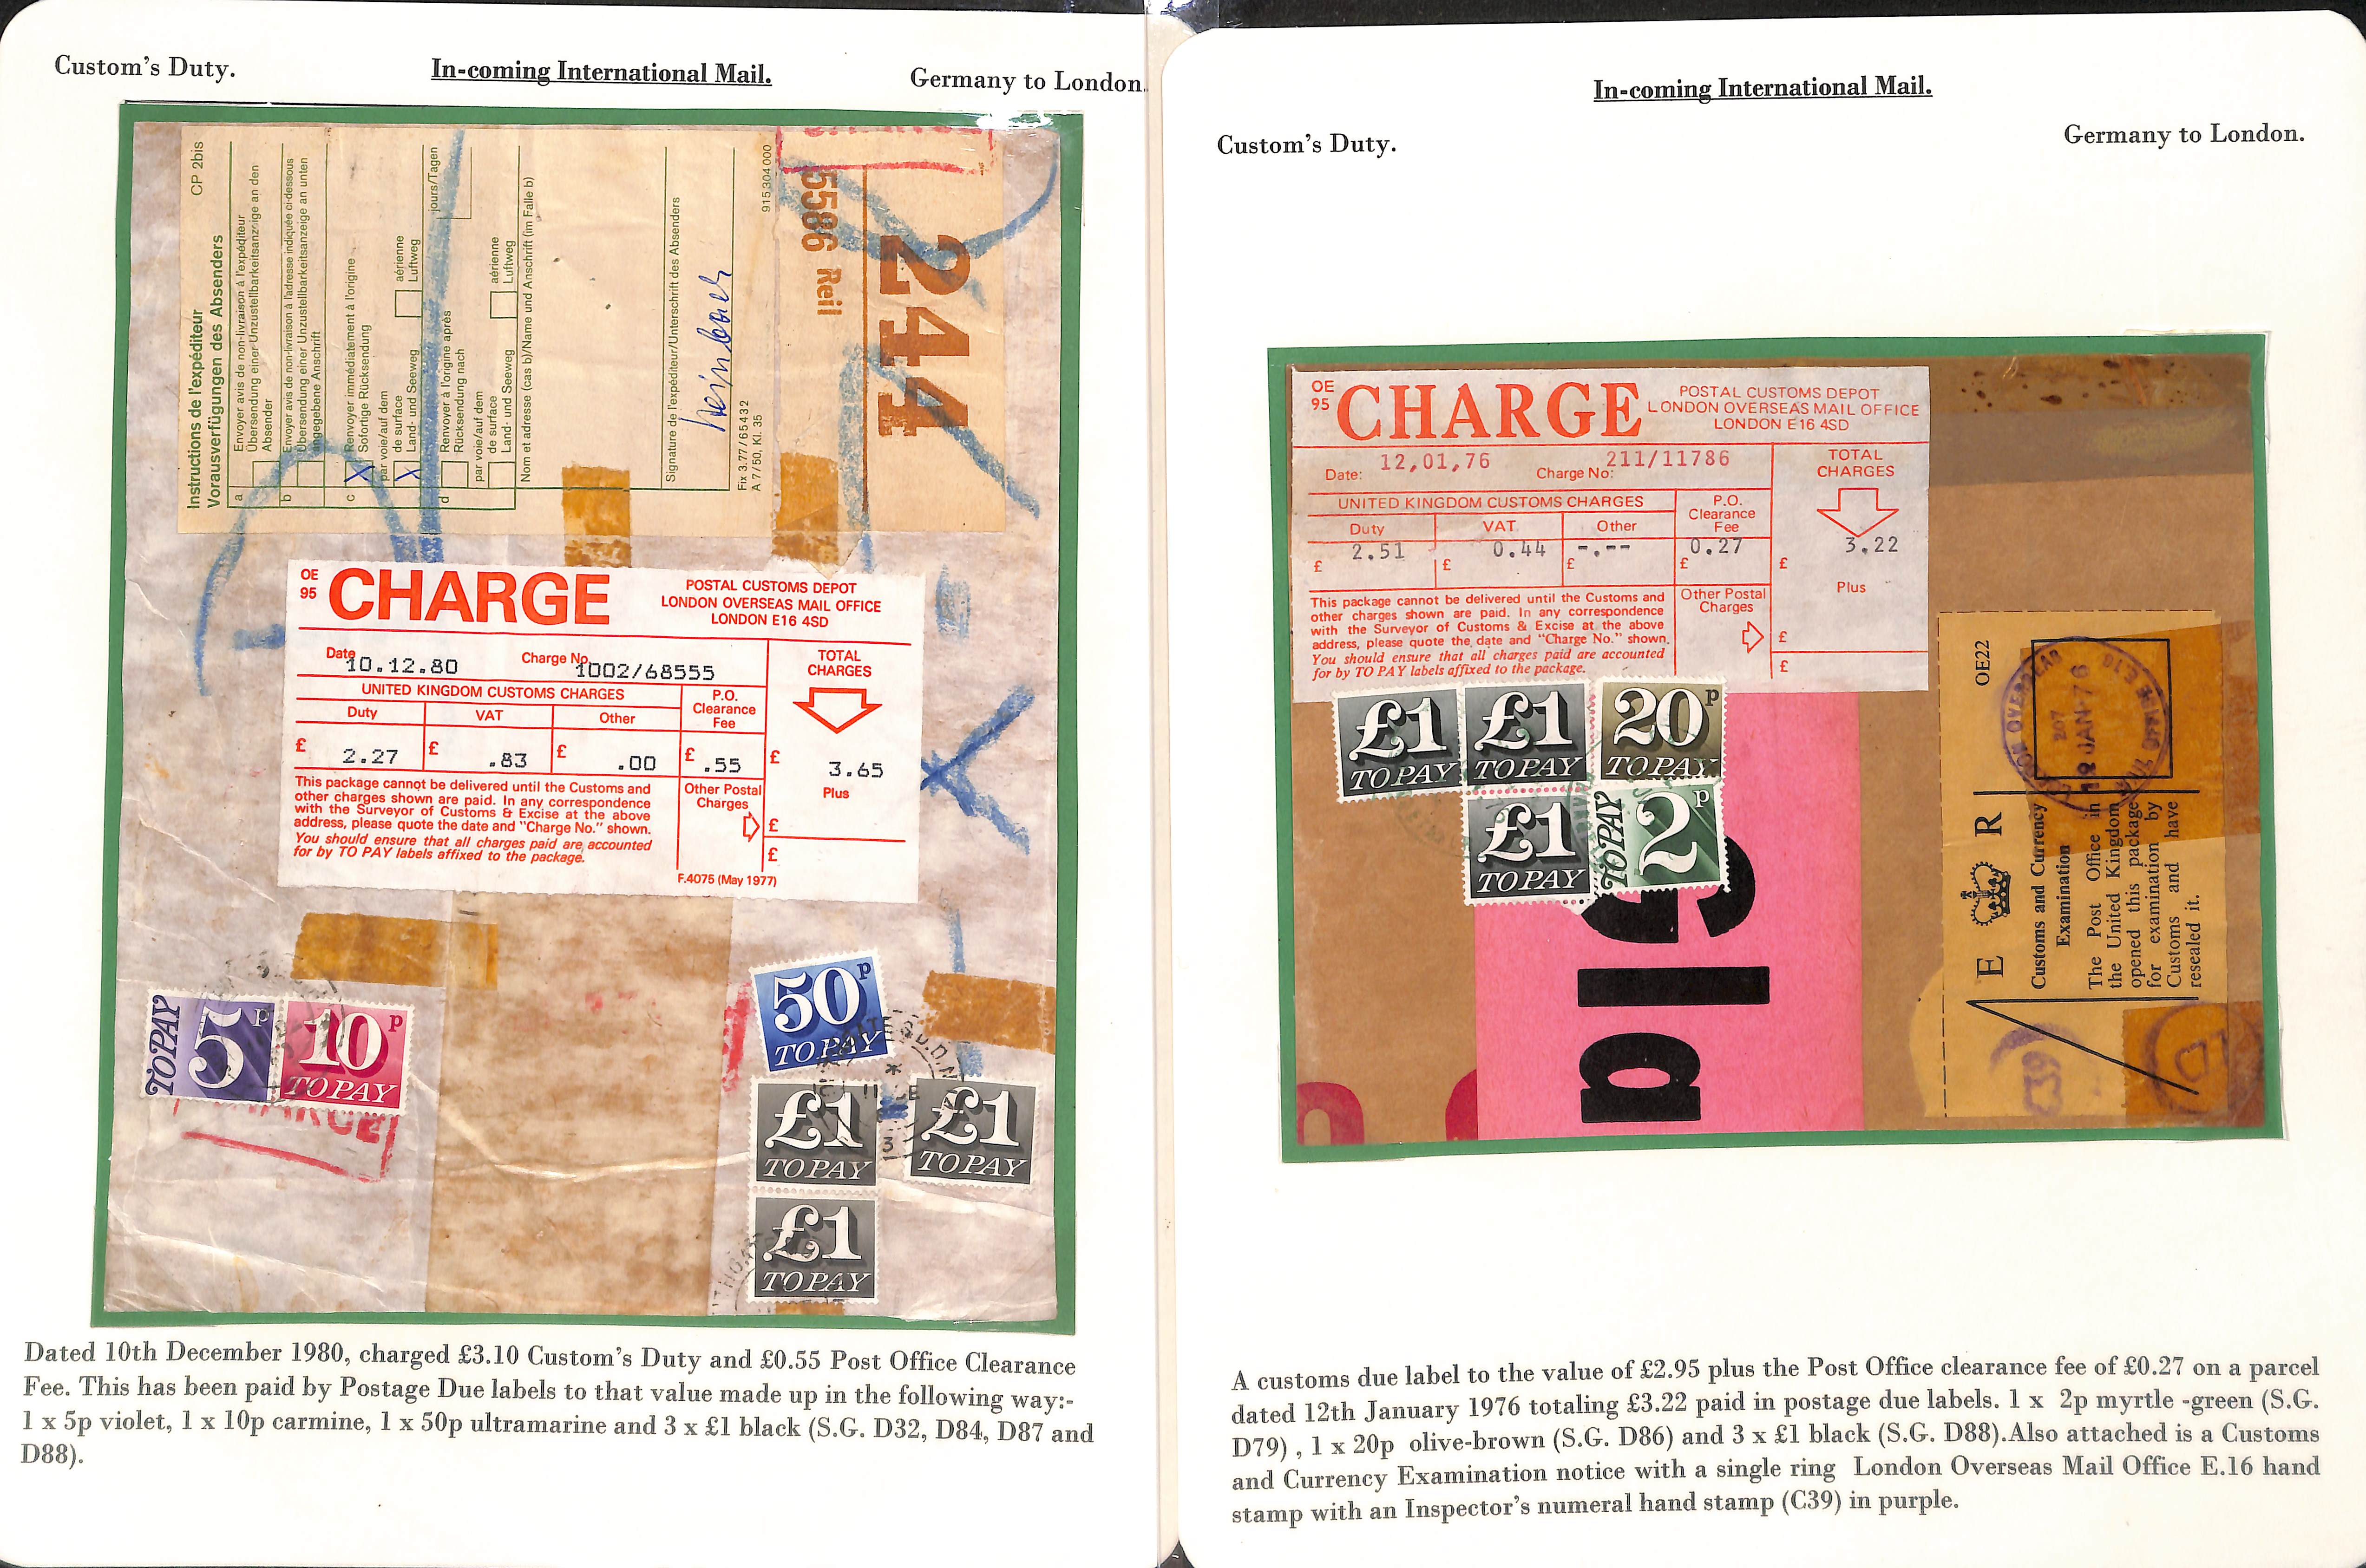 Customs Charges/Accumulated Charges. 1938-92 Covers or parcel address panels with customs duty or - Image 3 of 18